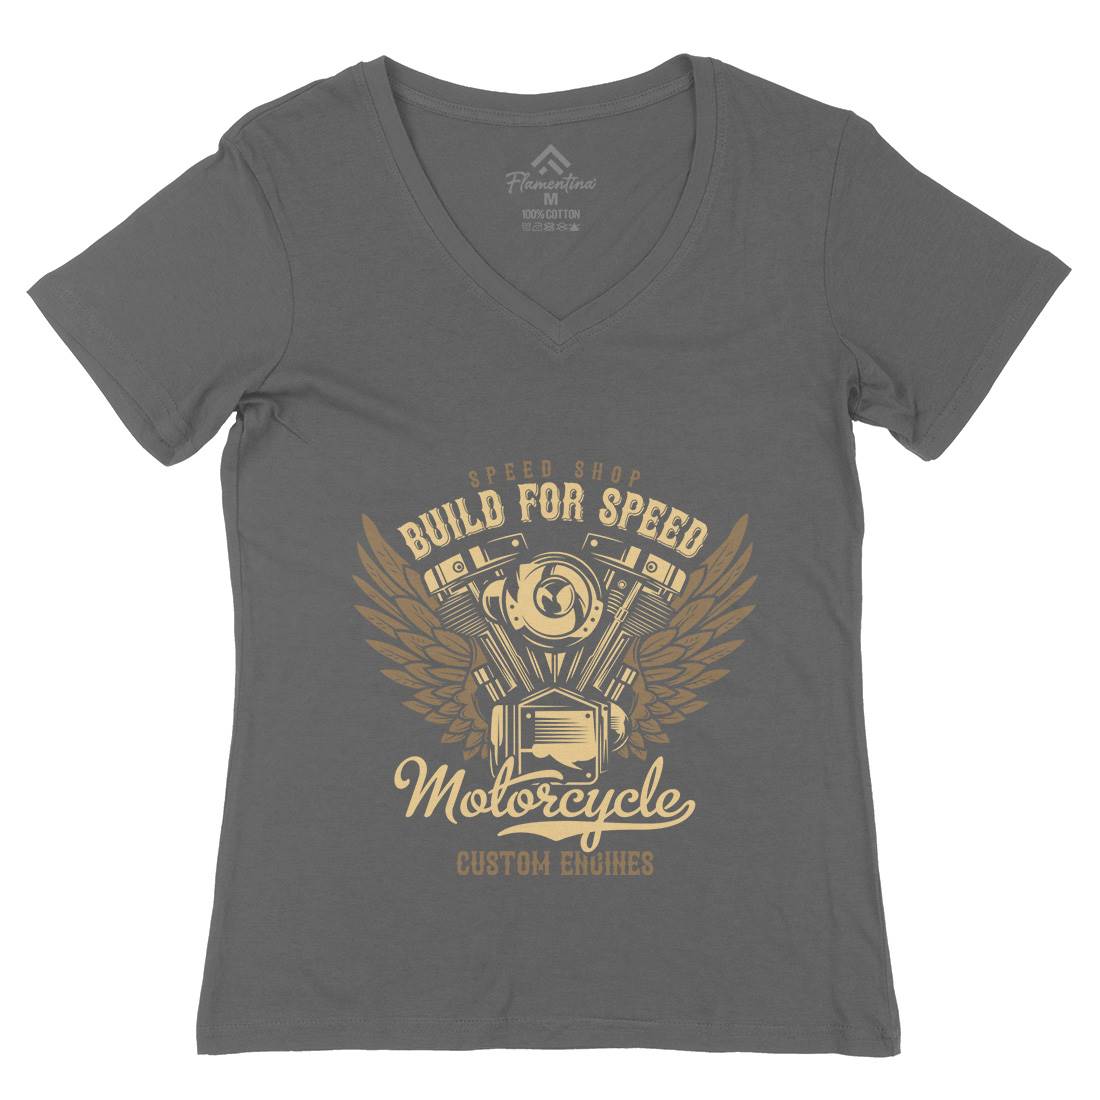 Build For Speed Womens Organic V-Neck T-Shirt Motorcycles B842